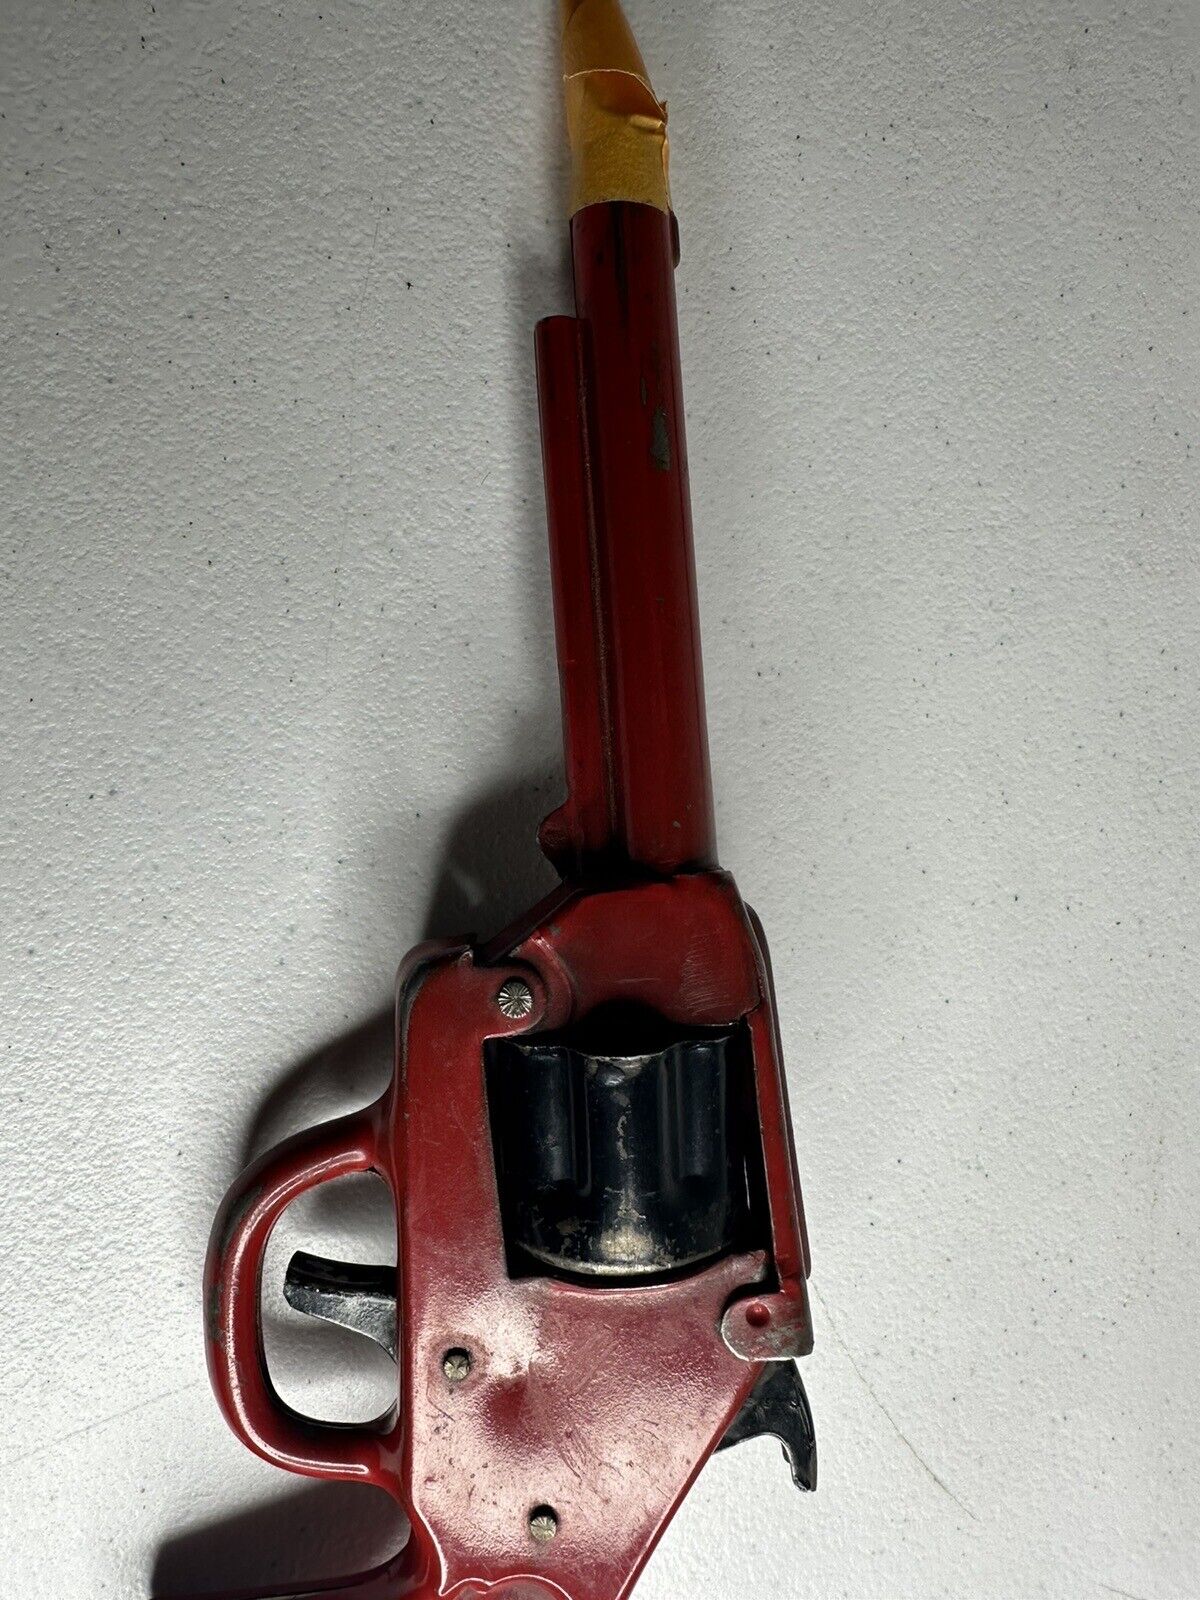 Vintage 1940s Wyandotte Pressed Steel Clicker Toy Gun with Skull and Crossbones Holster - 9.5 Inch Collectible - TreasuTiques